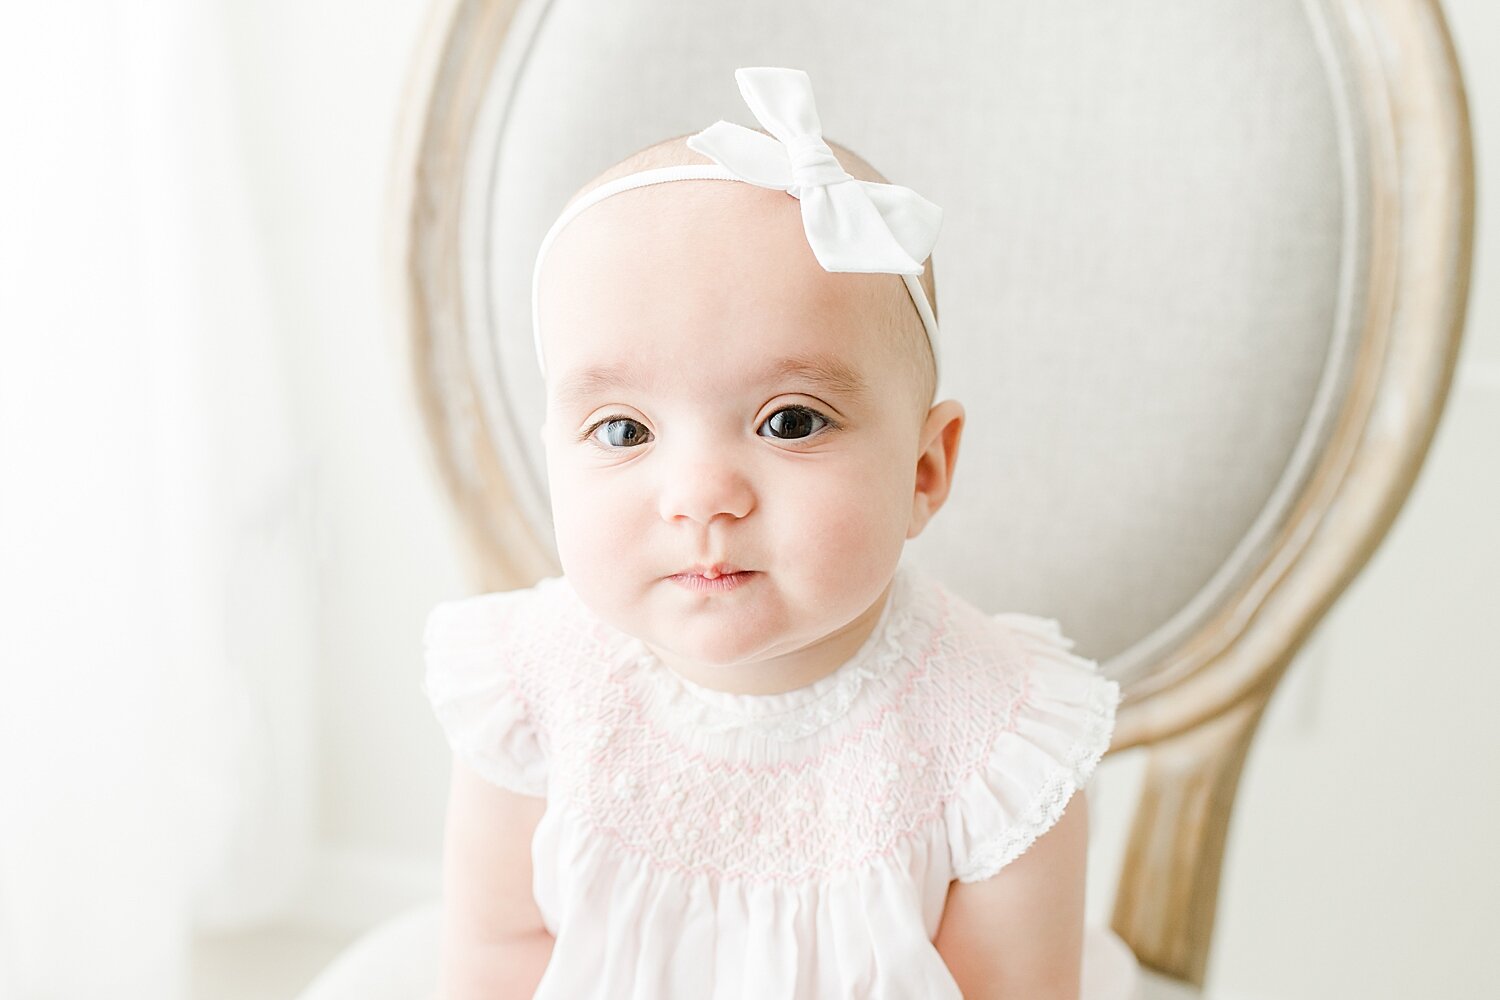 Classic baby portrait in studio in Darien, CT. Photo by Kristin Wood Photography.